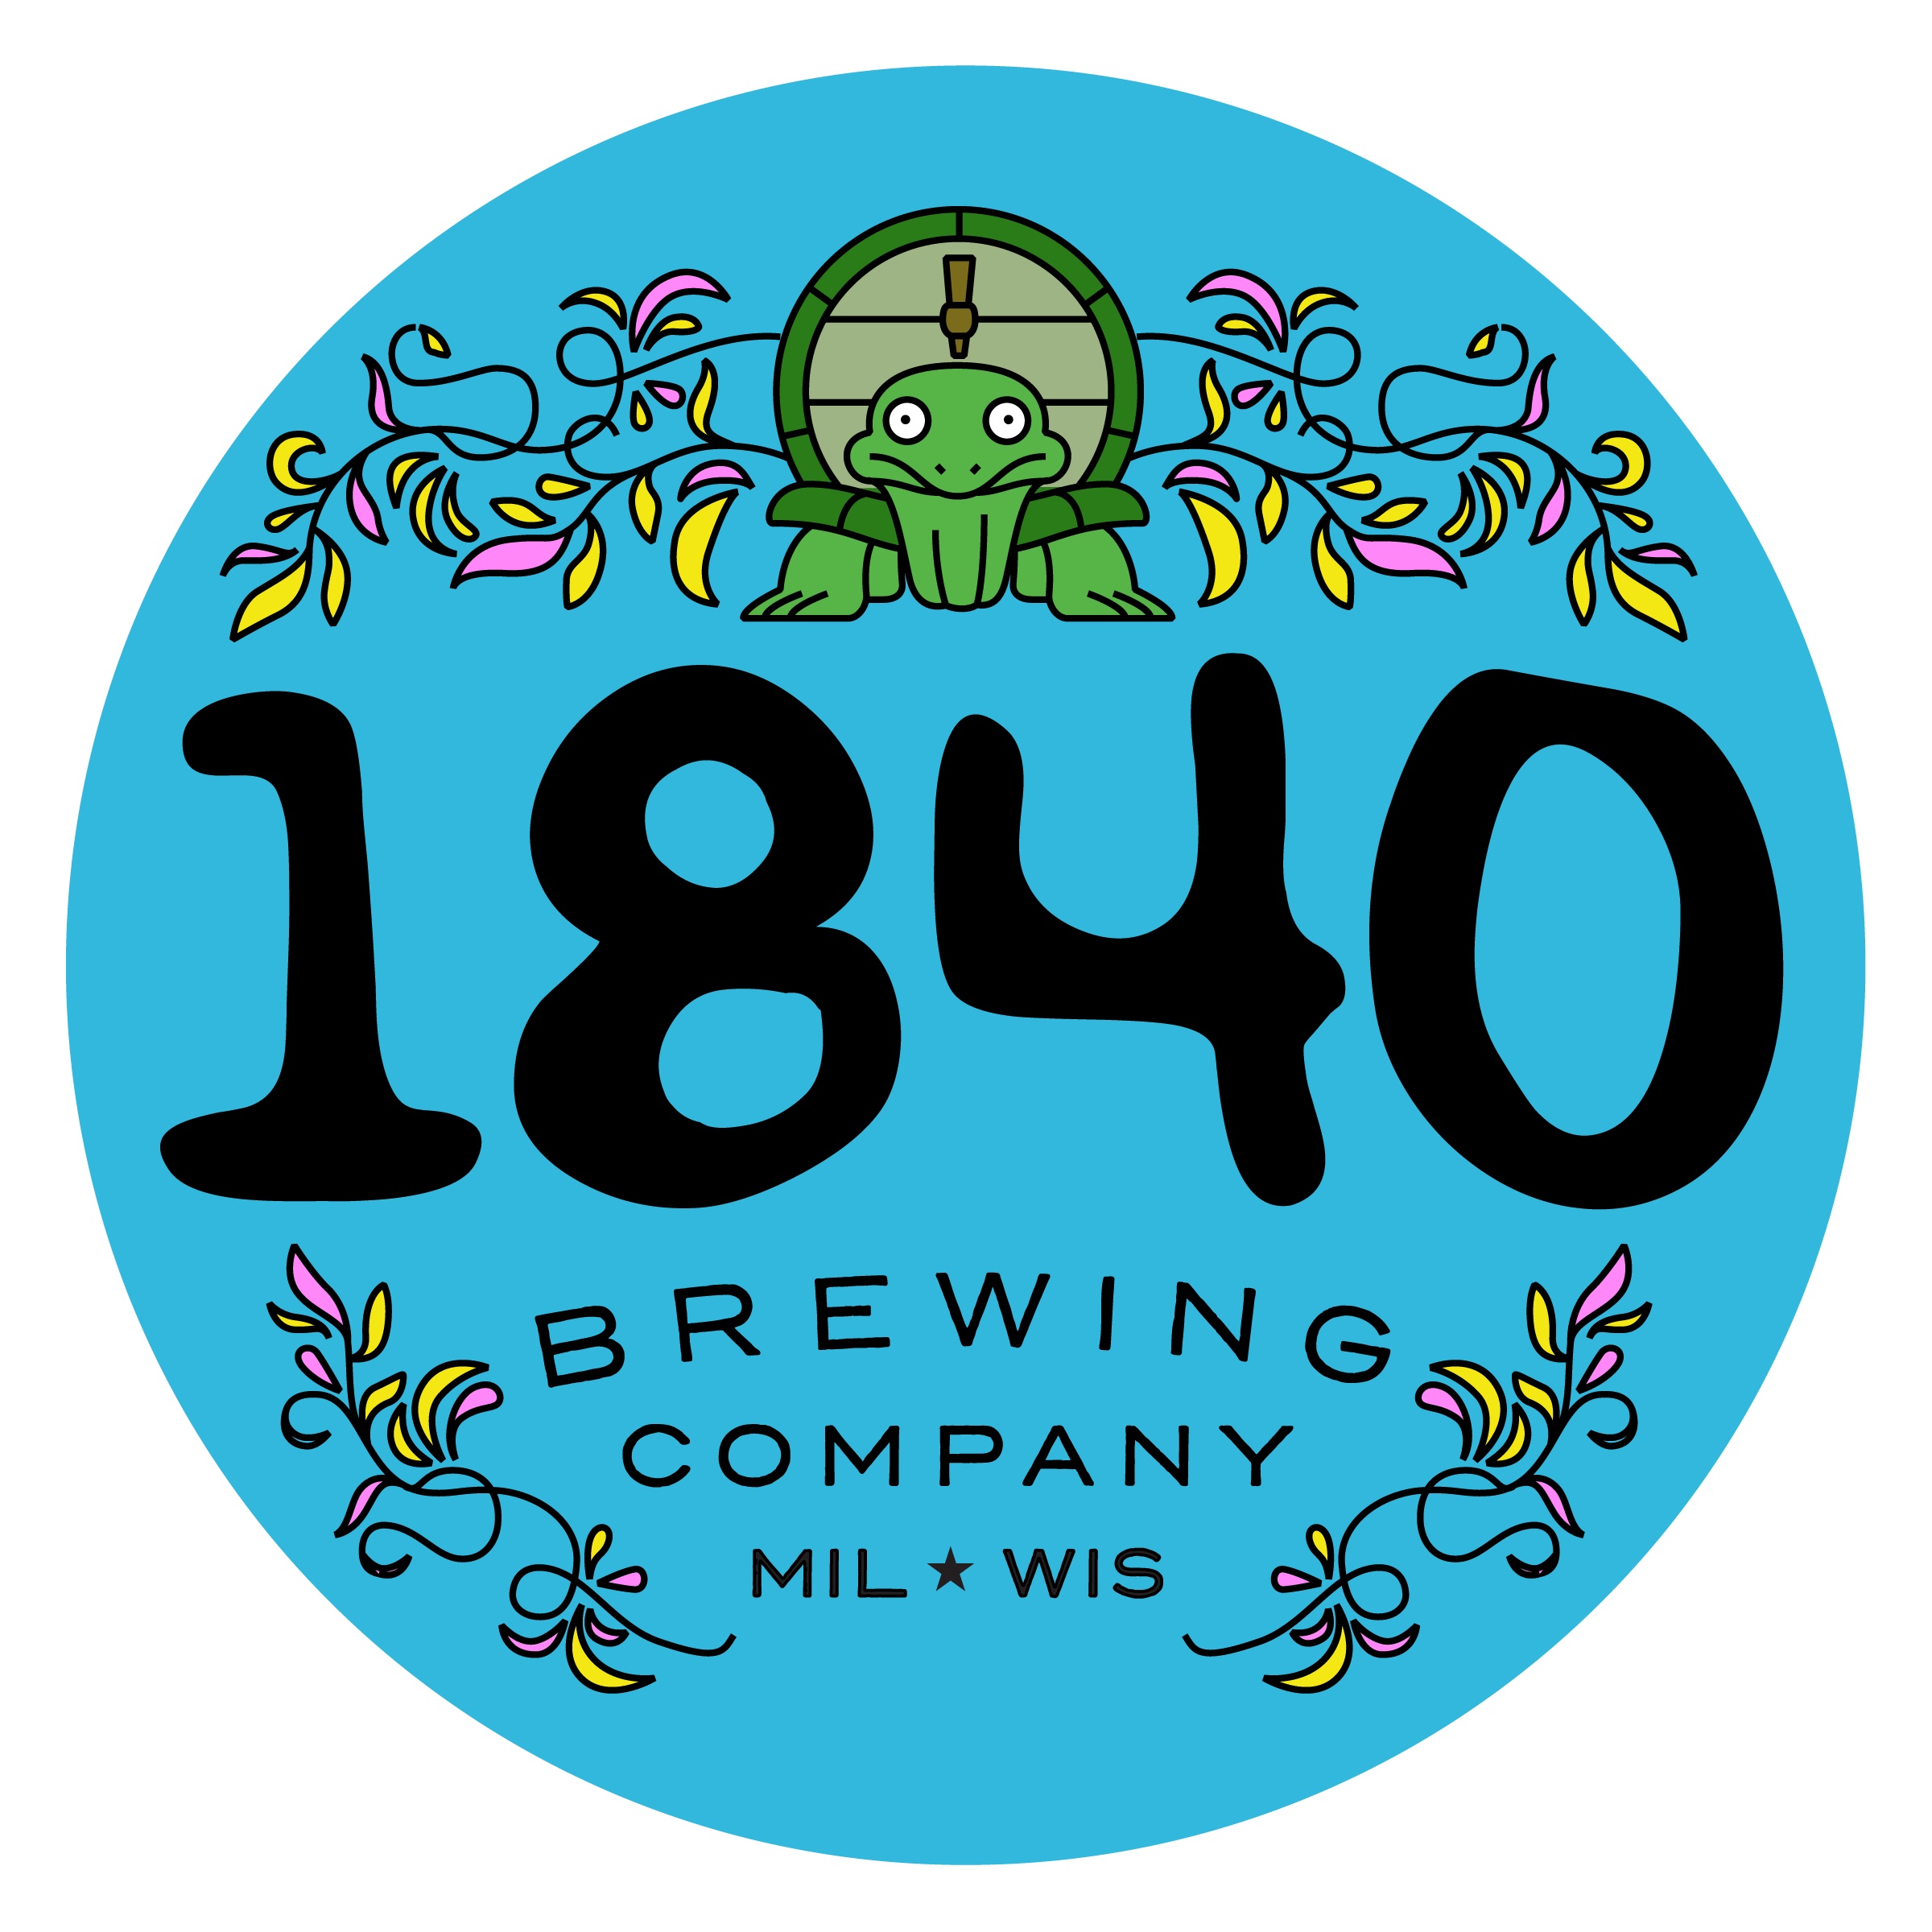 1840 Brewing is Transforming Into Springfield, USA for The Springfield Connection!